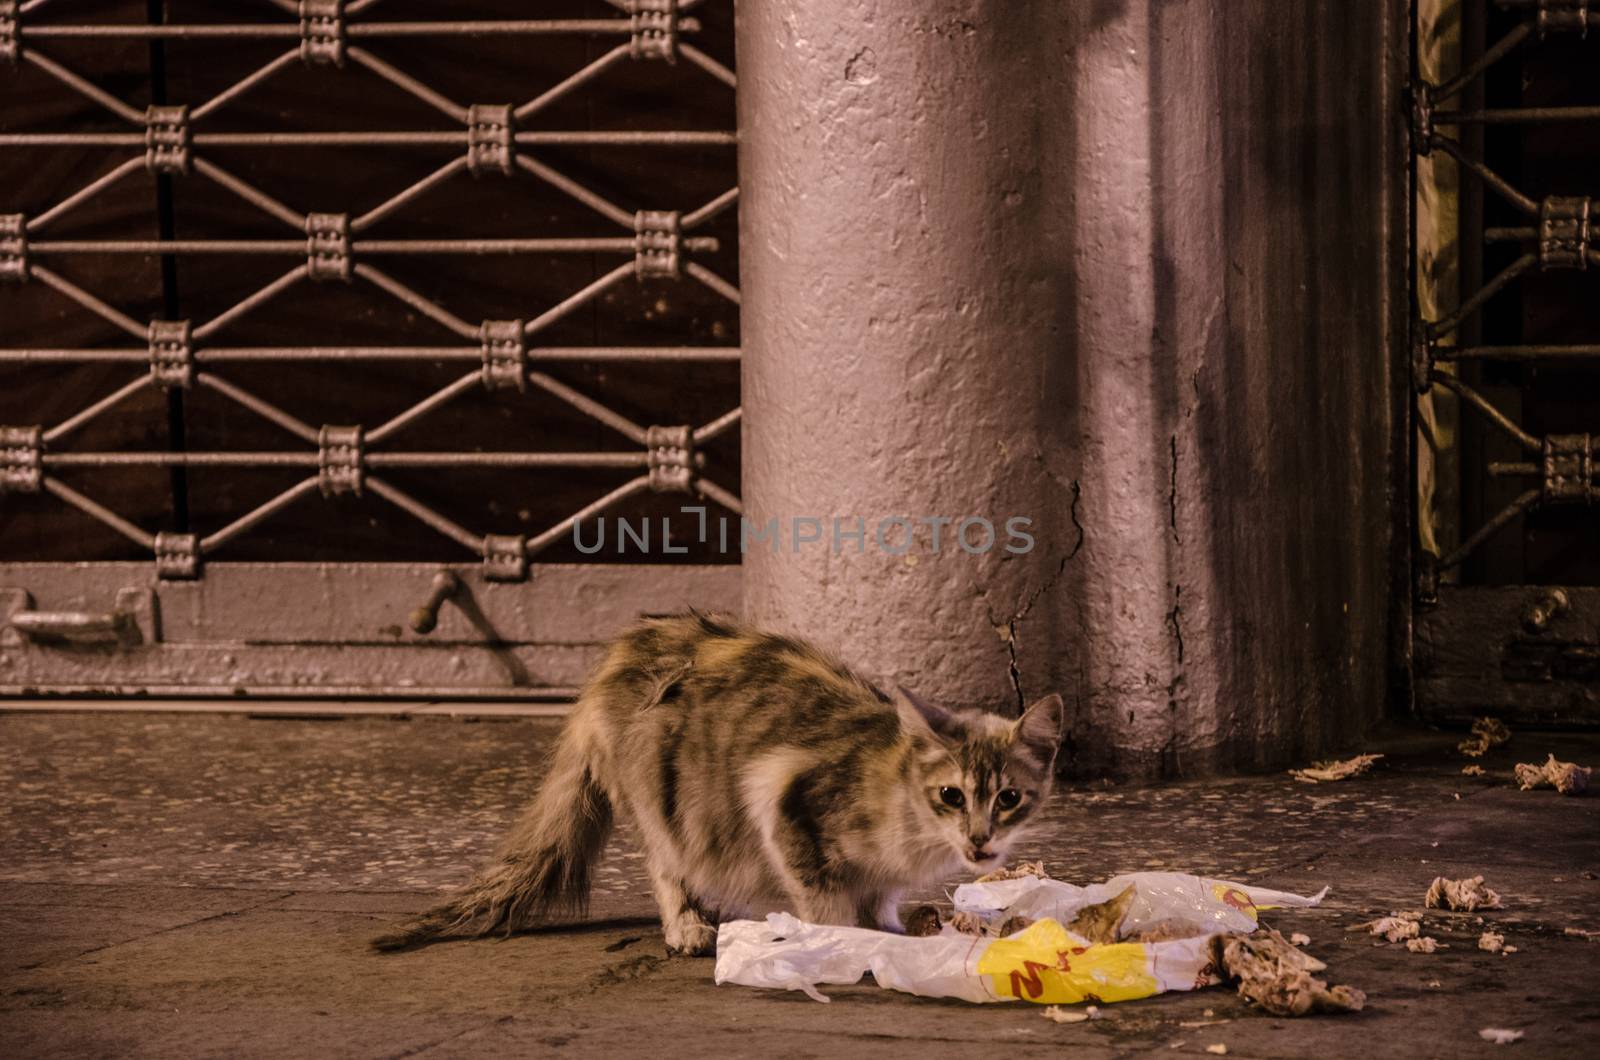 Cat eating garbage from a bag in the street